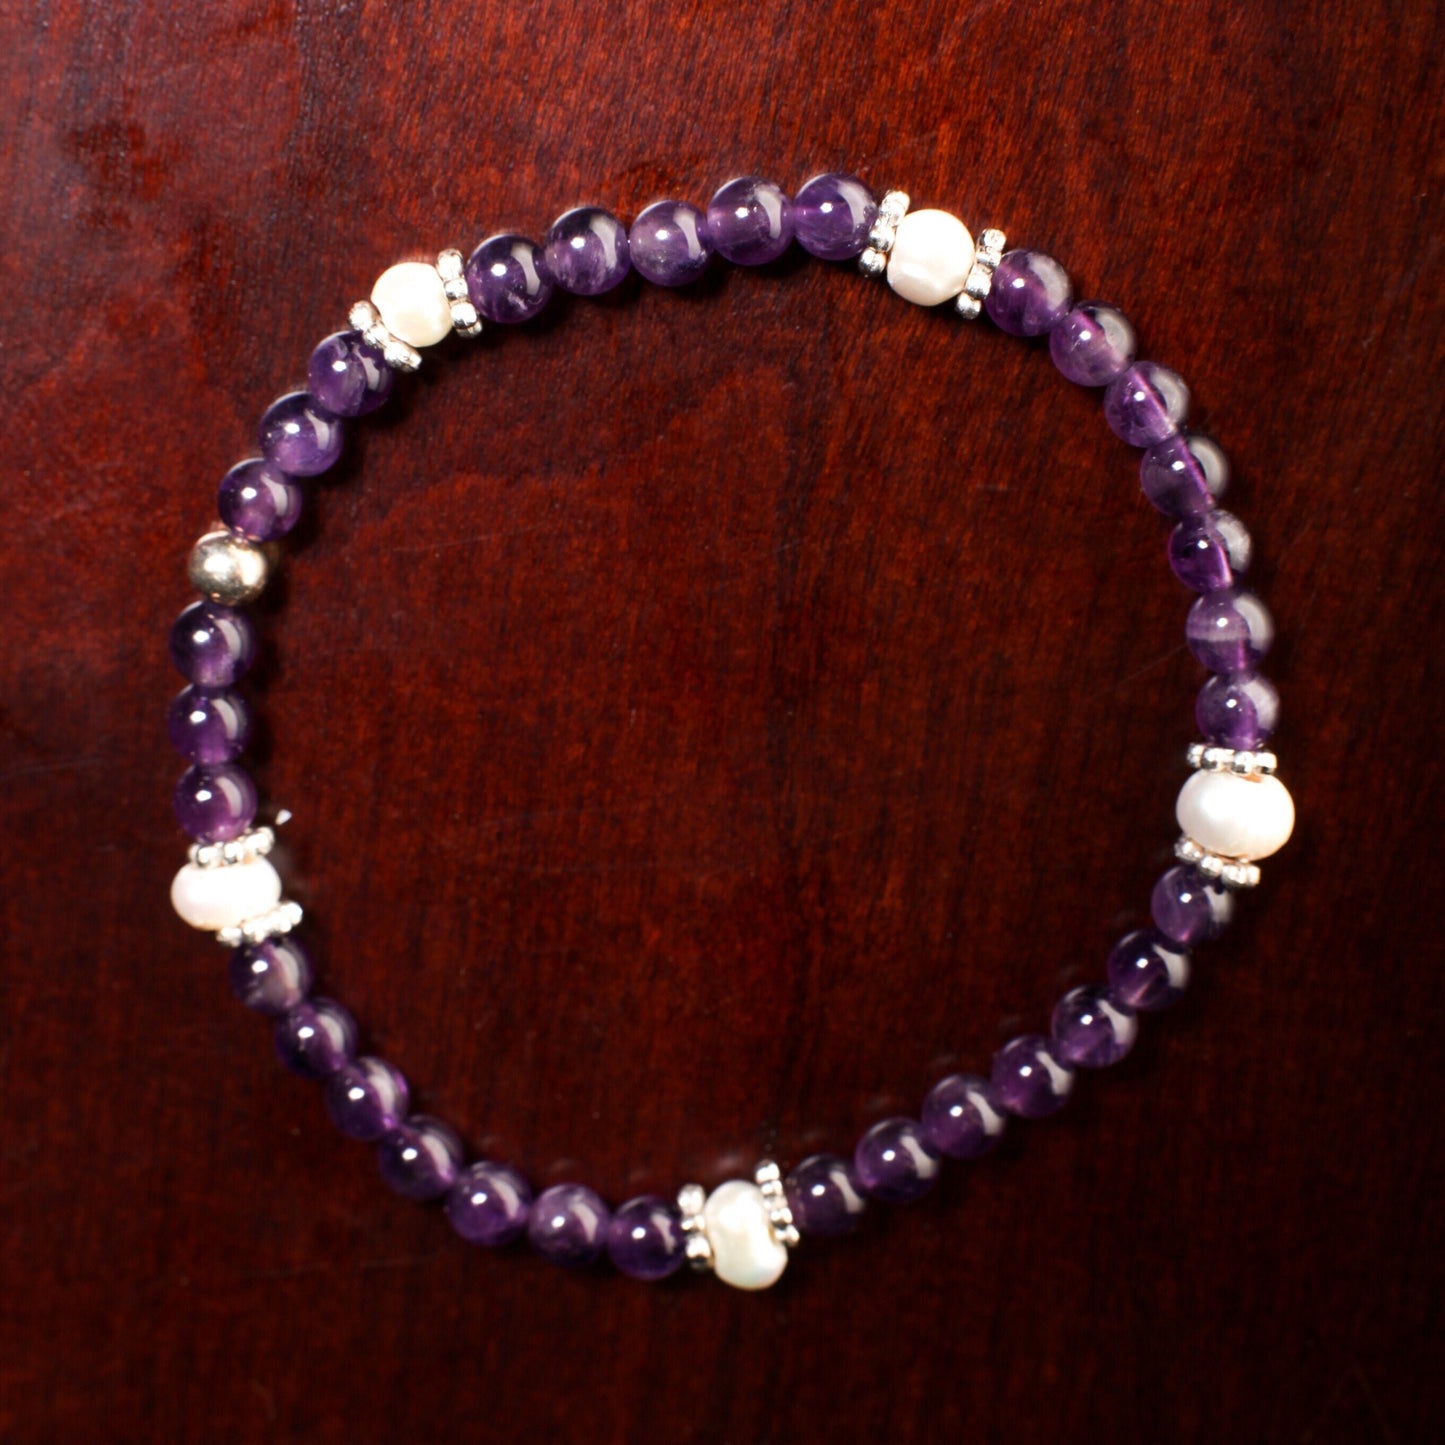 Natural Amethyst Round 4mm with Freshwater Pearl Rondelle Gemstone Bracelet, Healing Crystal, Yoga, Energy, Stretchy, Soothing Bracelet Gift